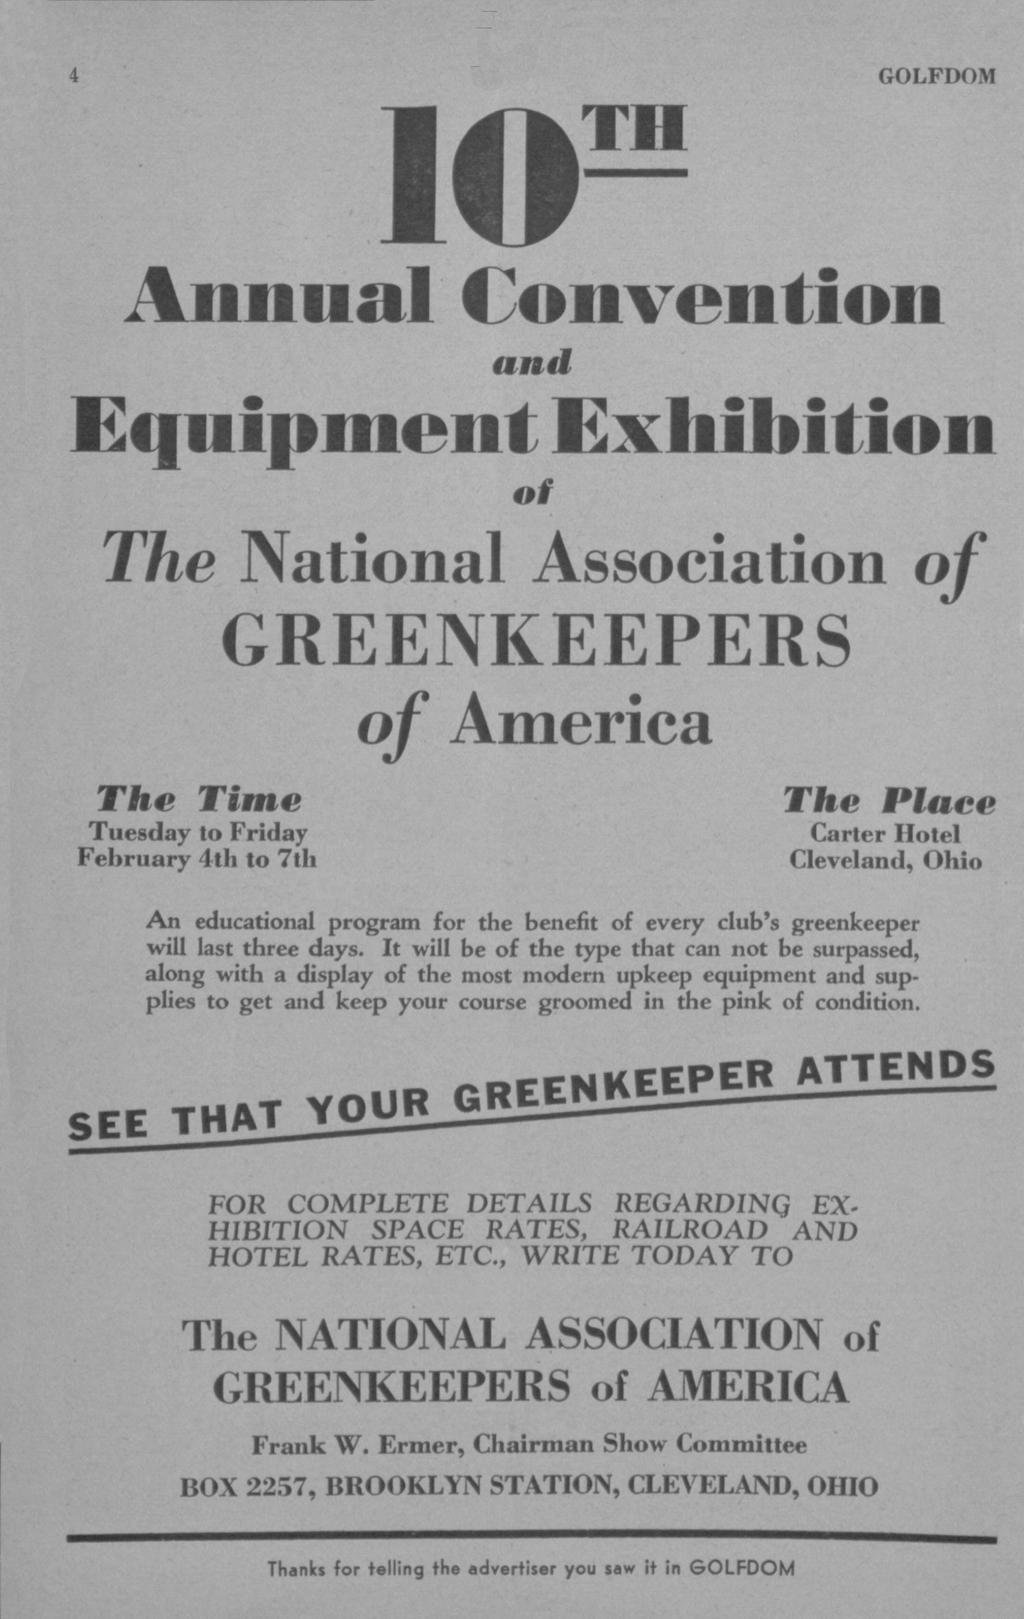 Annual Convention and Equipment Exhibition of The National Association of GREENKEEPERS of America The Time The Plaee Tuesday to Friday February 4th to 7th Carter Hotel Cleveland, Ohio An educational